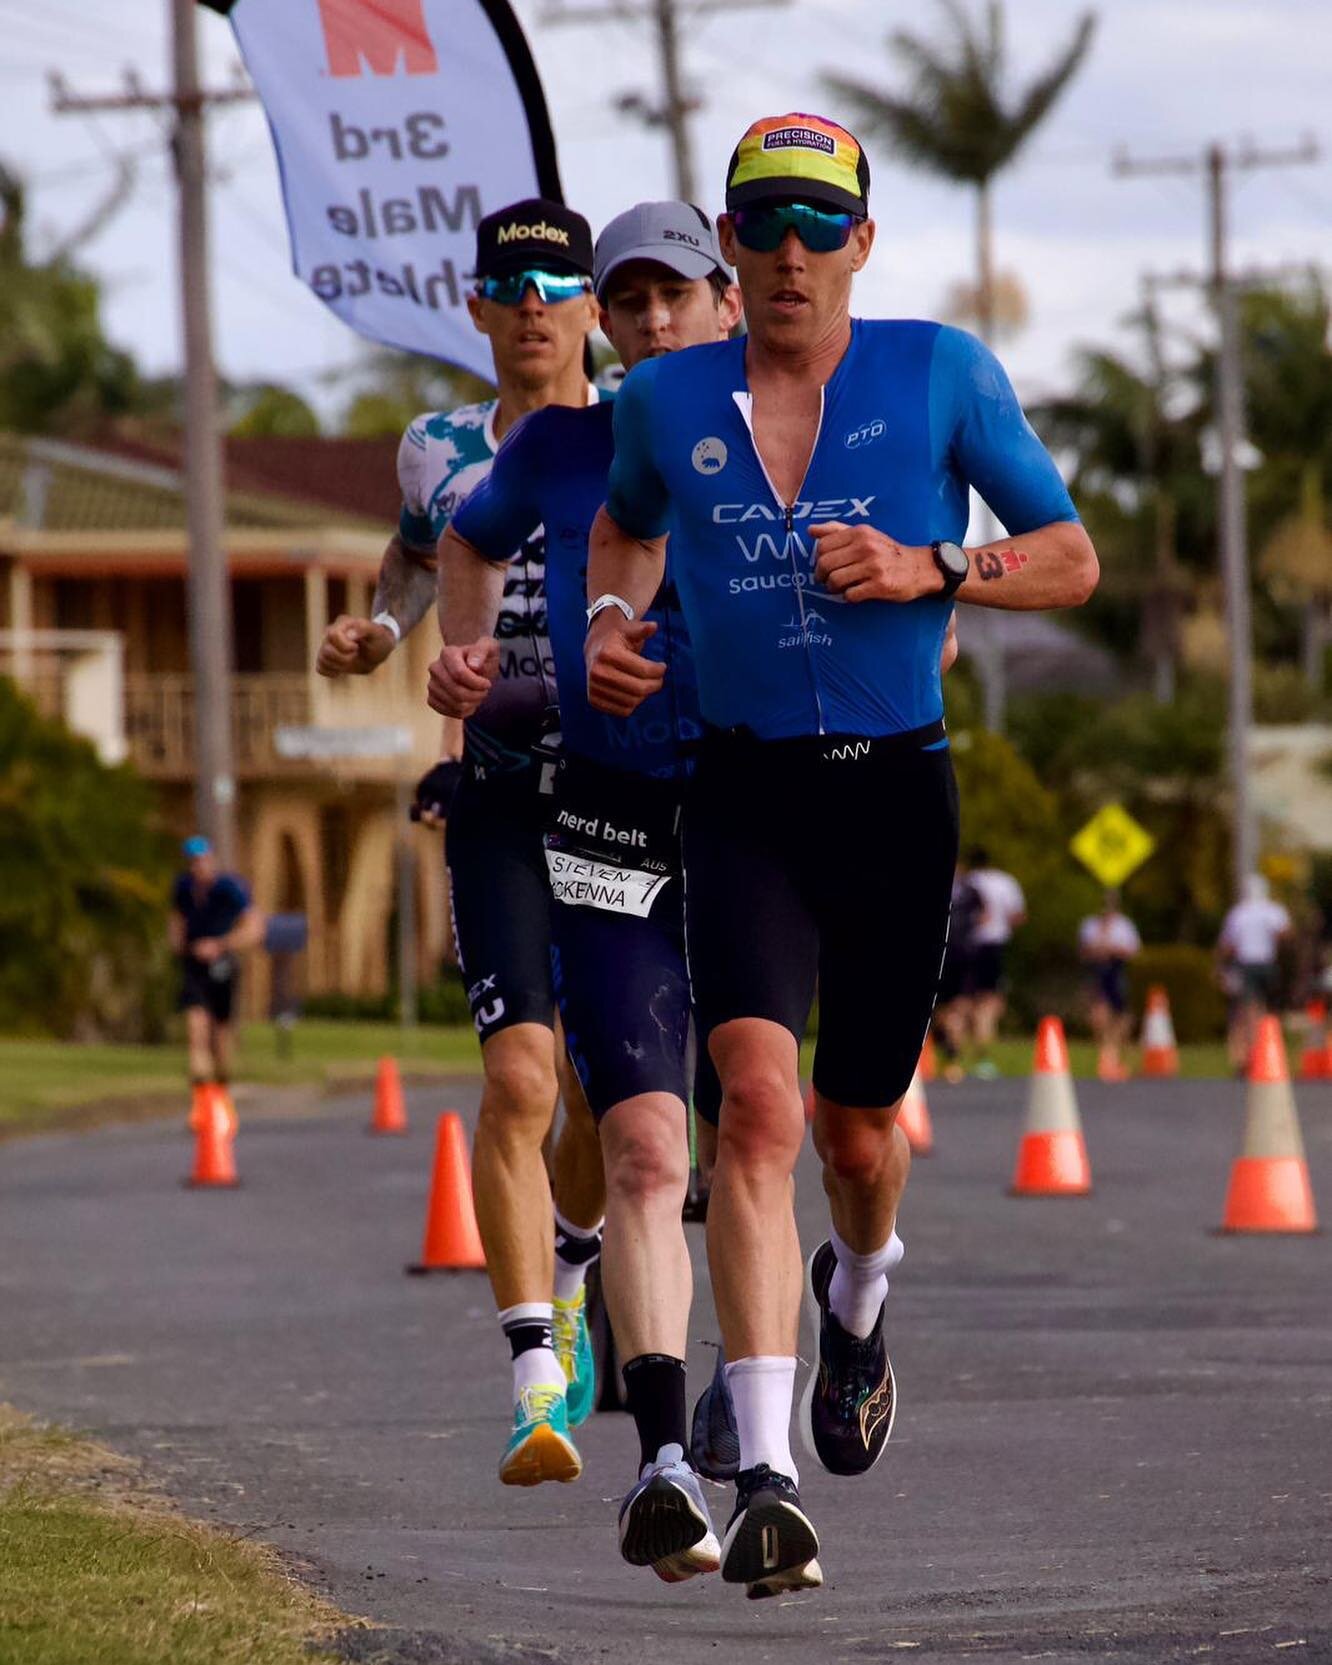 A big improvement for me over the marathon at last weekends @ironmanoceania #IMAUS. Still room for improvement across the board, but extremely motivated for the season ahead. 📸 @imlukemckenzie / @wynrepublic